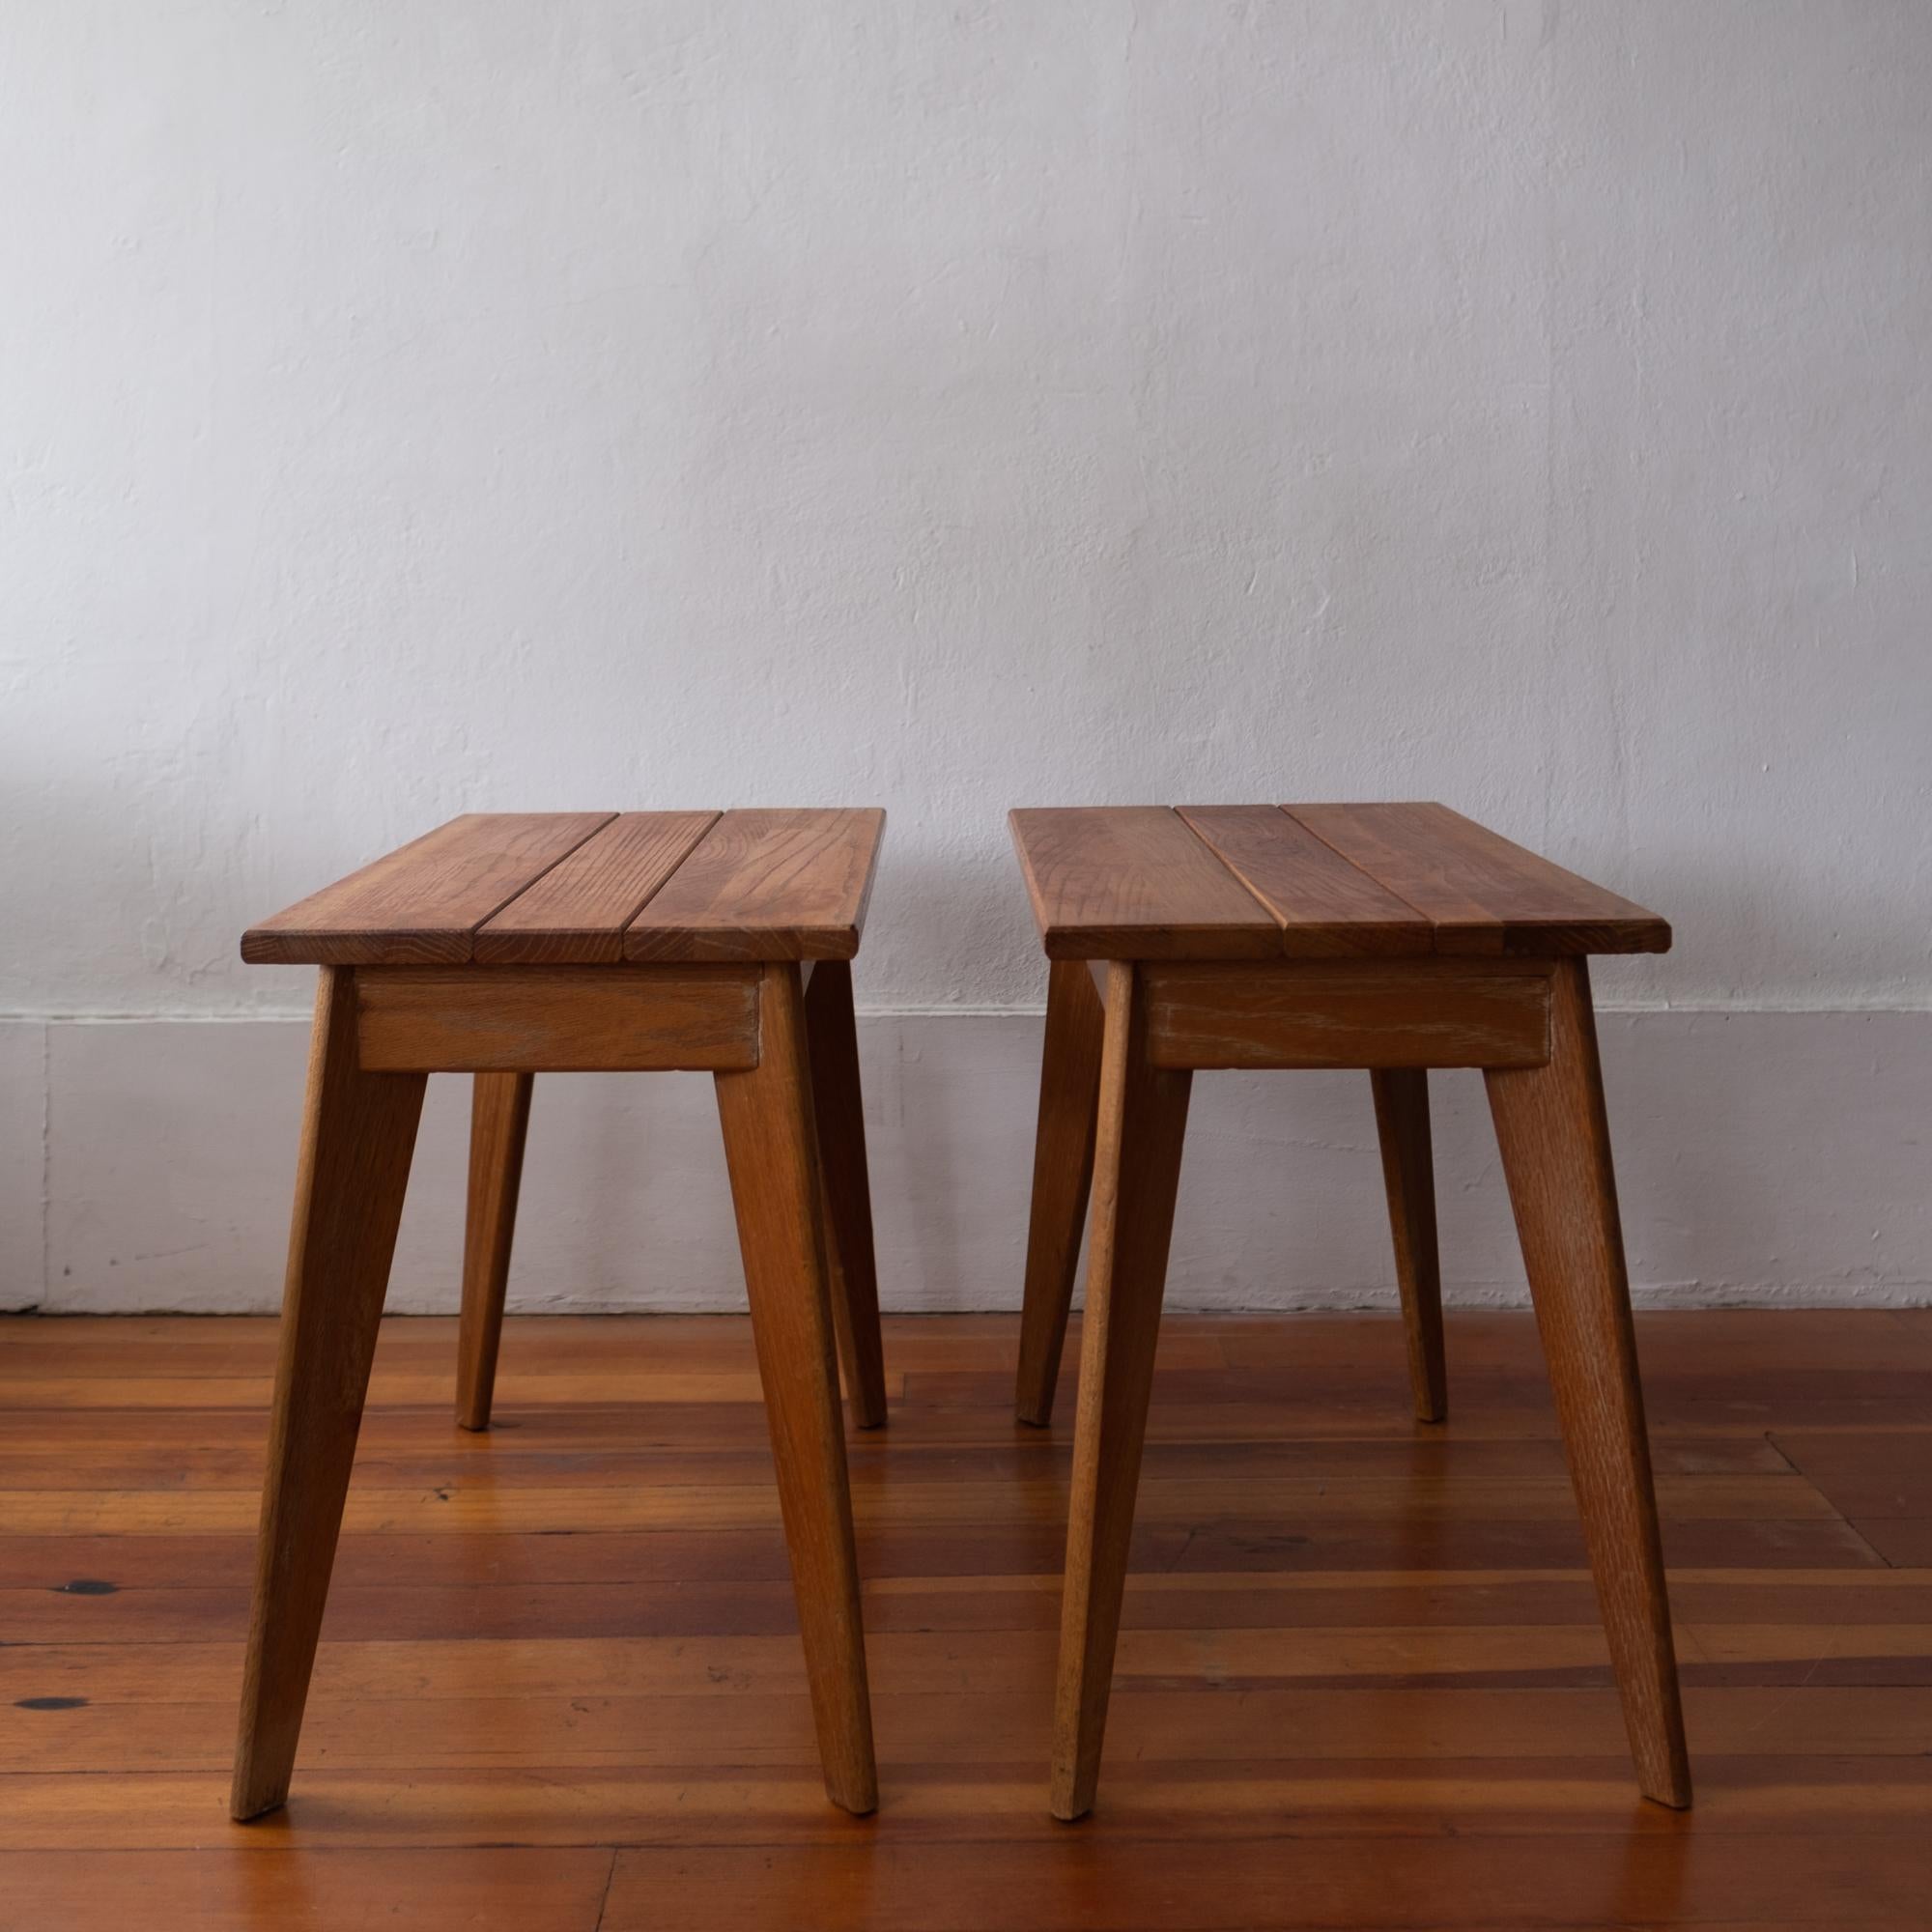 A pair of limed oak end tables or nightstands from the 1940s. Great design with a beautiful patina.